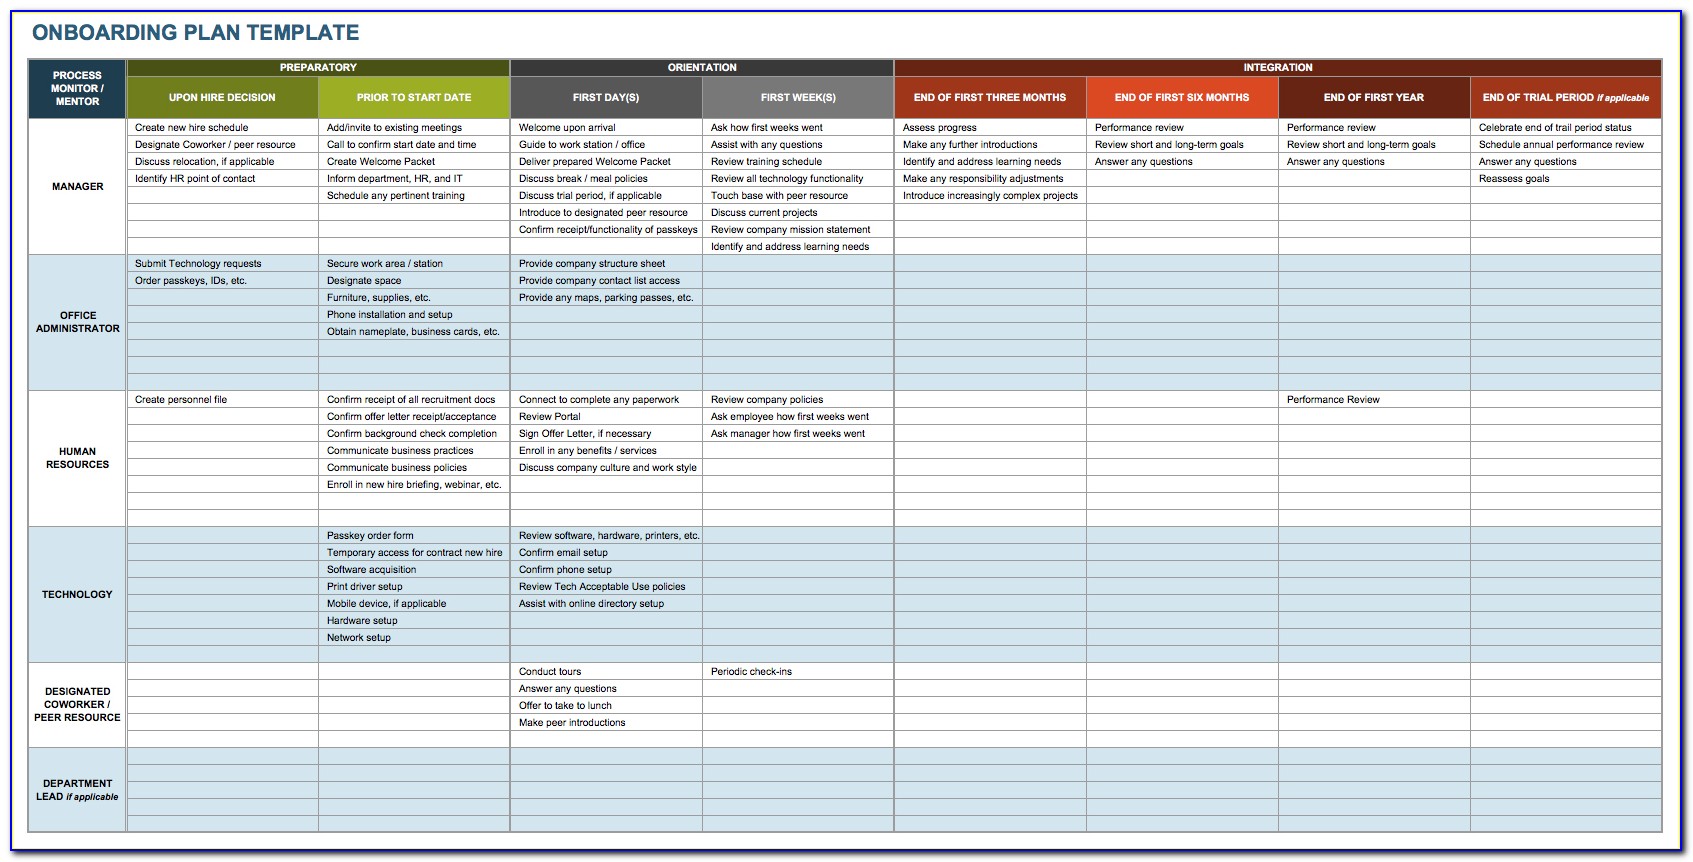 New Hire Onboarding Schedule Template